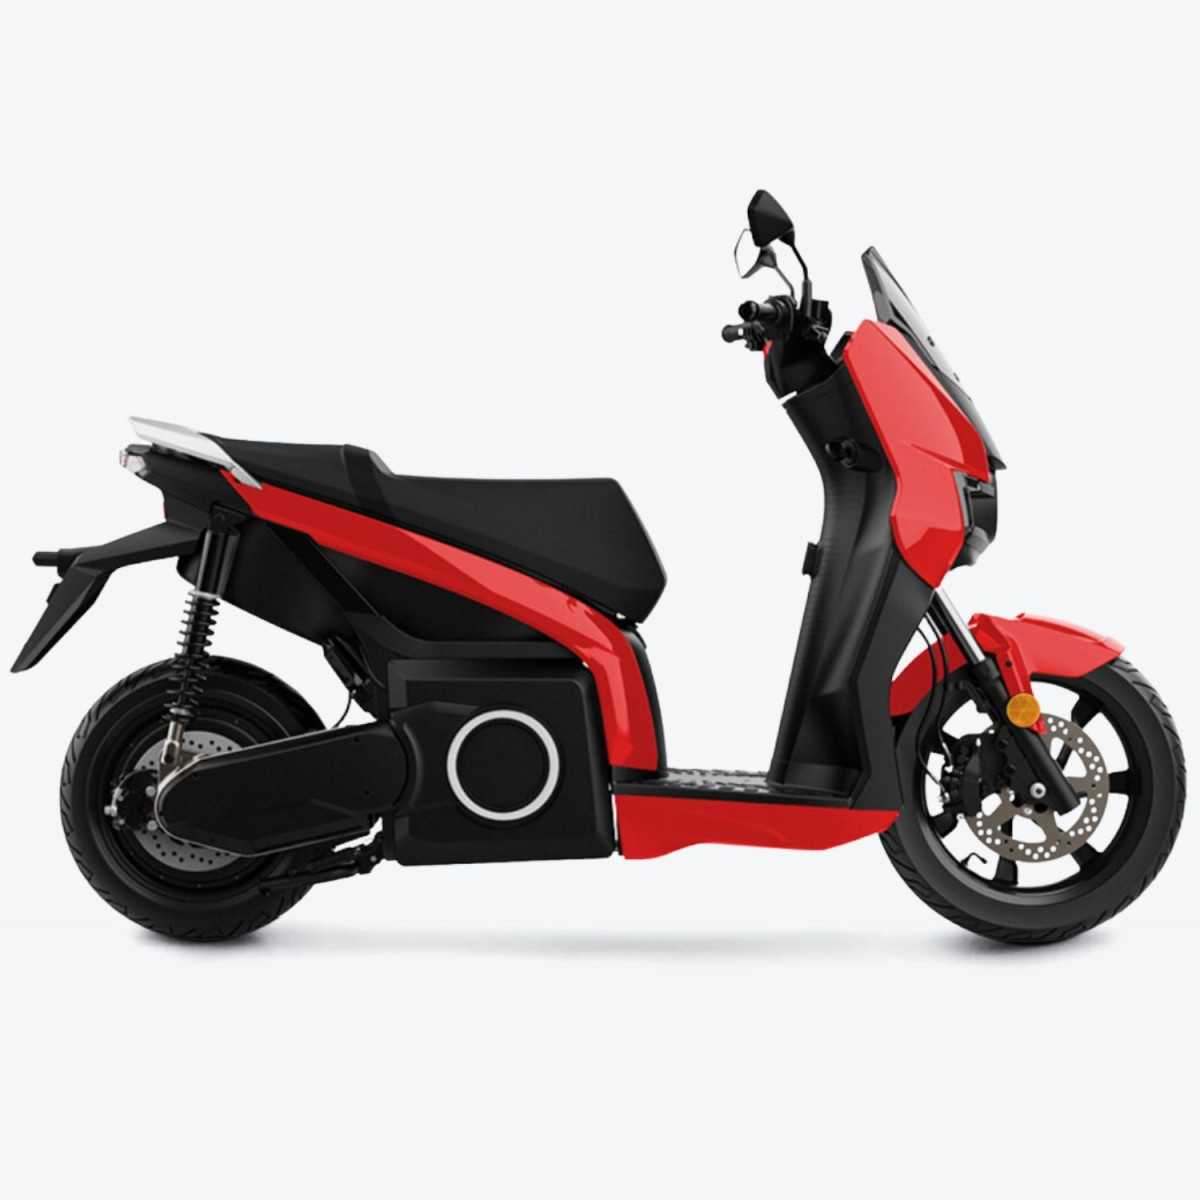 Casque Scooter Silence Urban Mobility - Casque Jet